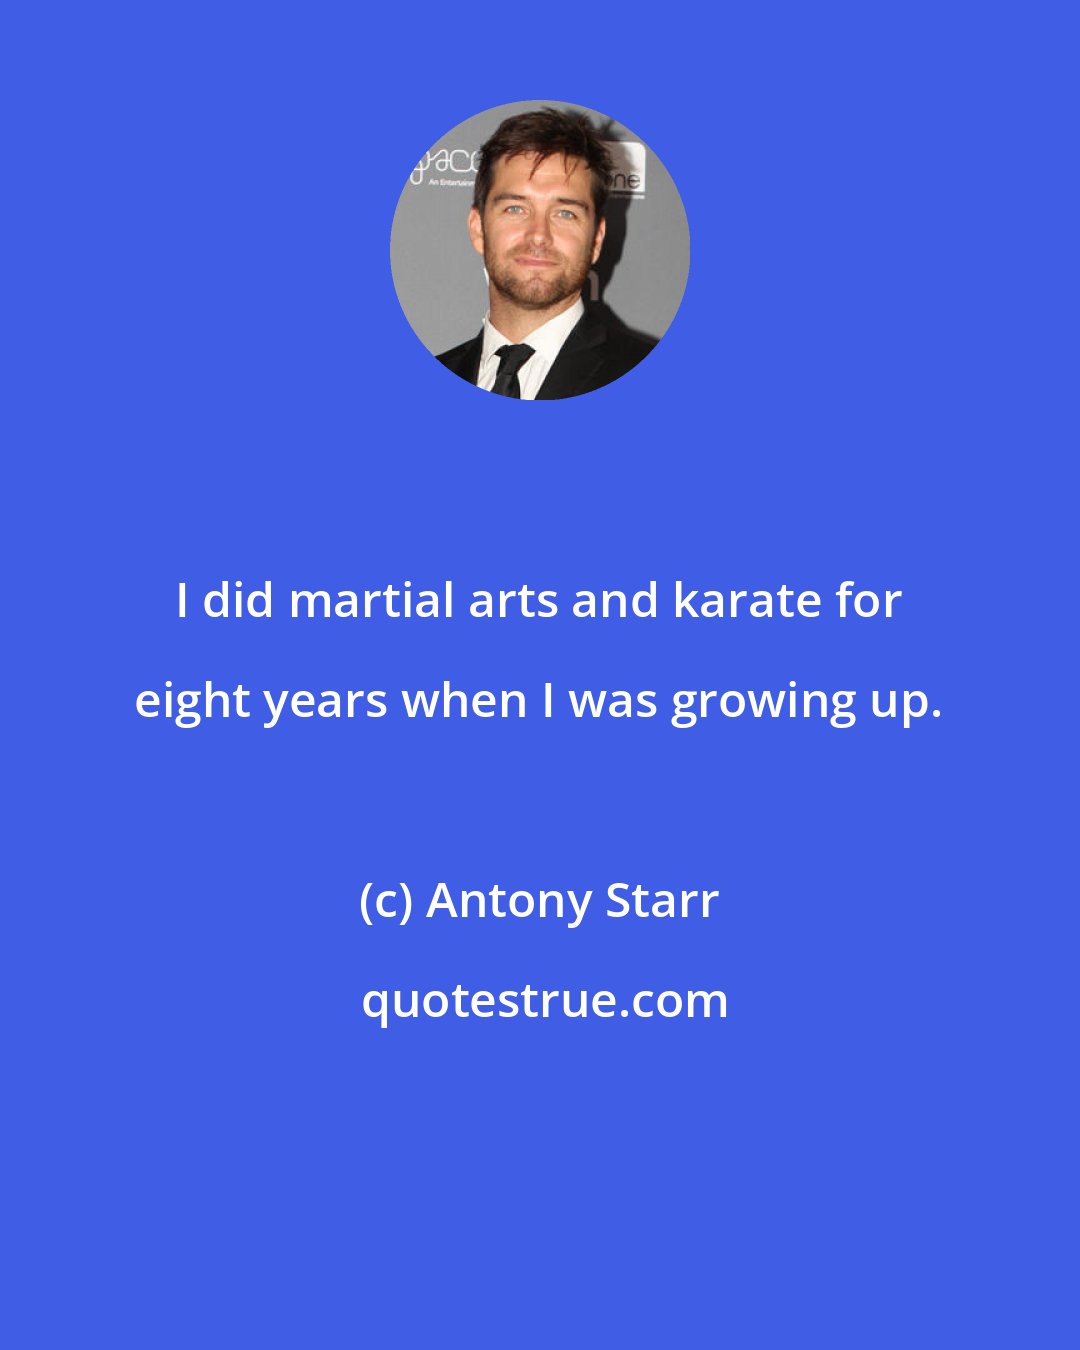 Antony Starr: I did martial arts and karate for eight years when I was growing up.